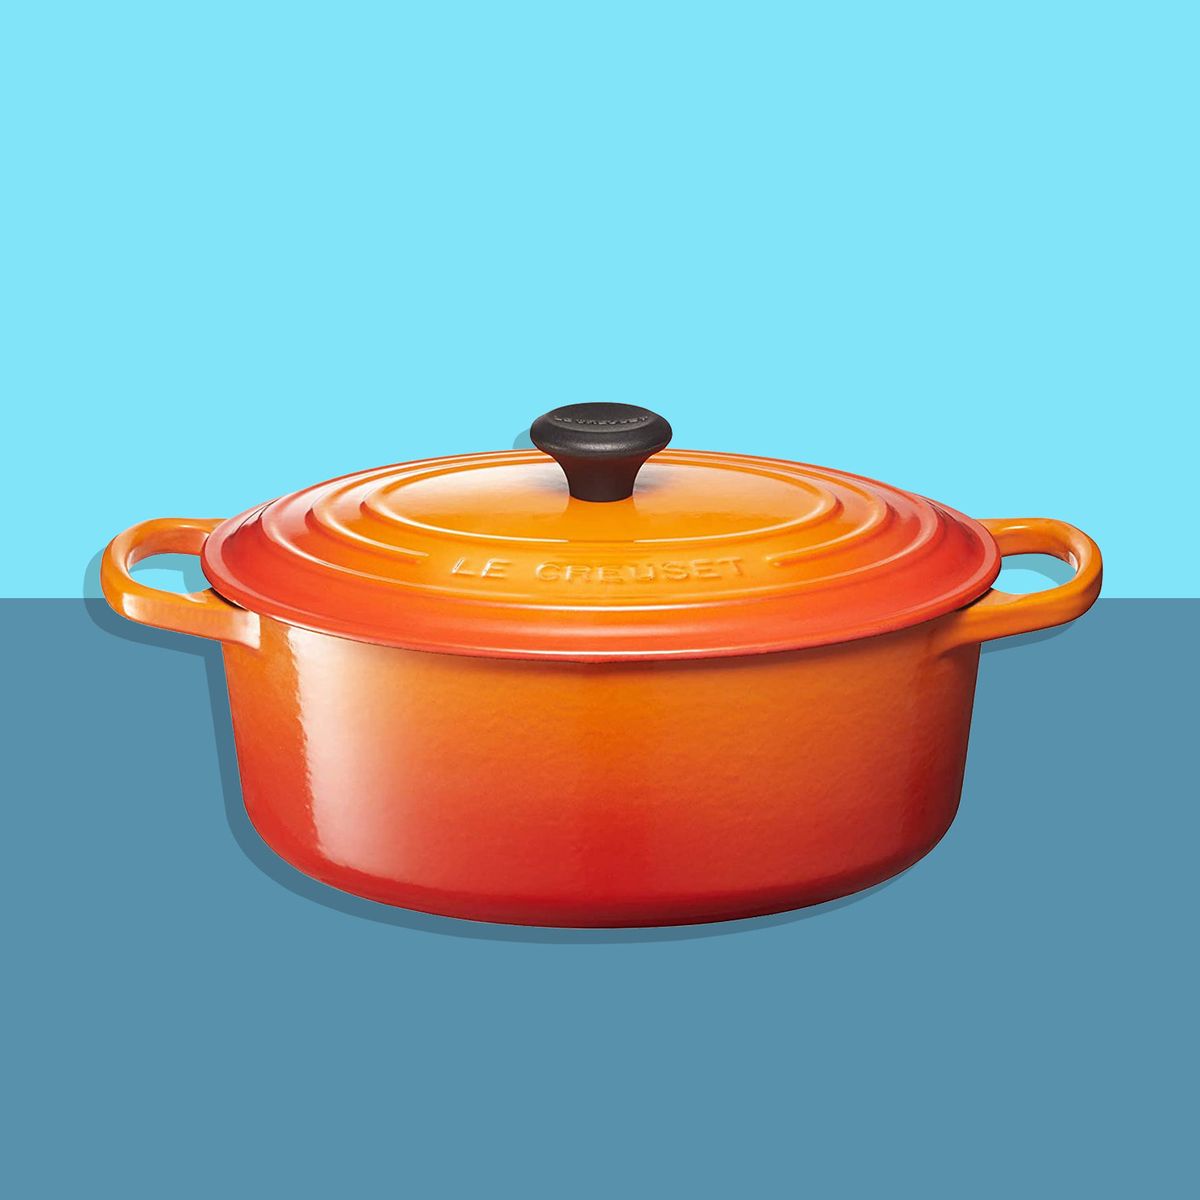 Zenuw De lucht Margaret Mitchell Le Creuset Dutch Ovens Are Up to 38 Percent Off Today | The Strategist